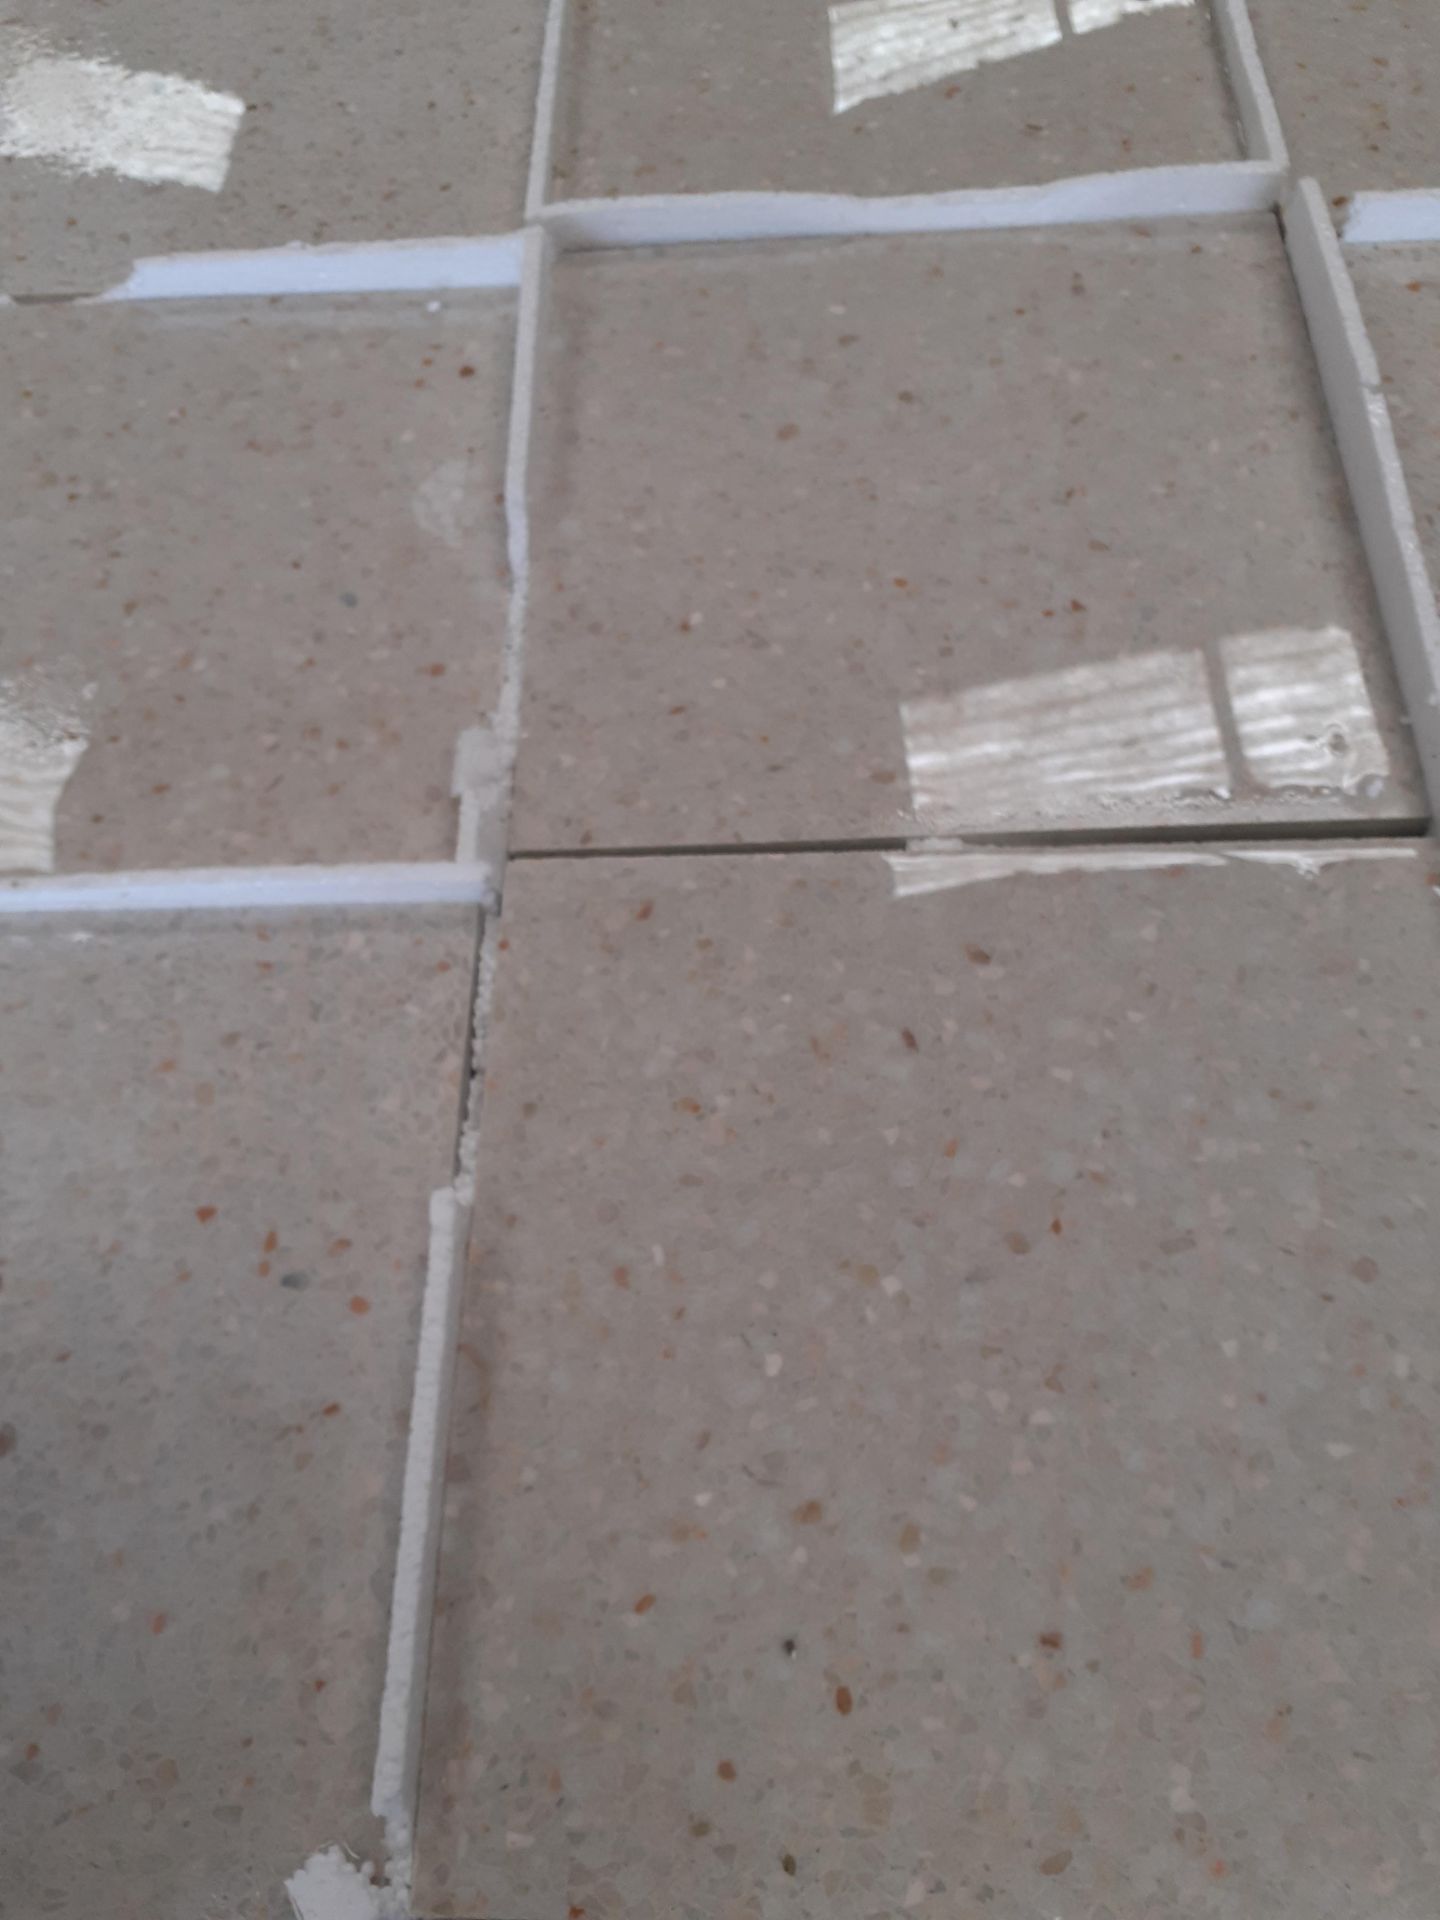 1 PALLET OF BRAND NEW TERRAZZO COMMERCIAL FLOOR TILES (Z30011), COVERS 24 SQUARE YARDS *PLUS VAT* - Image 11 of 15